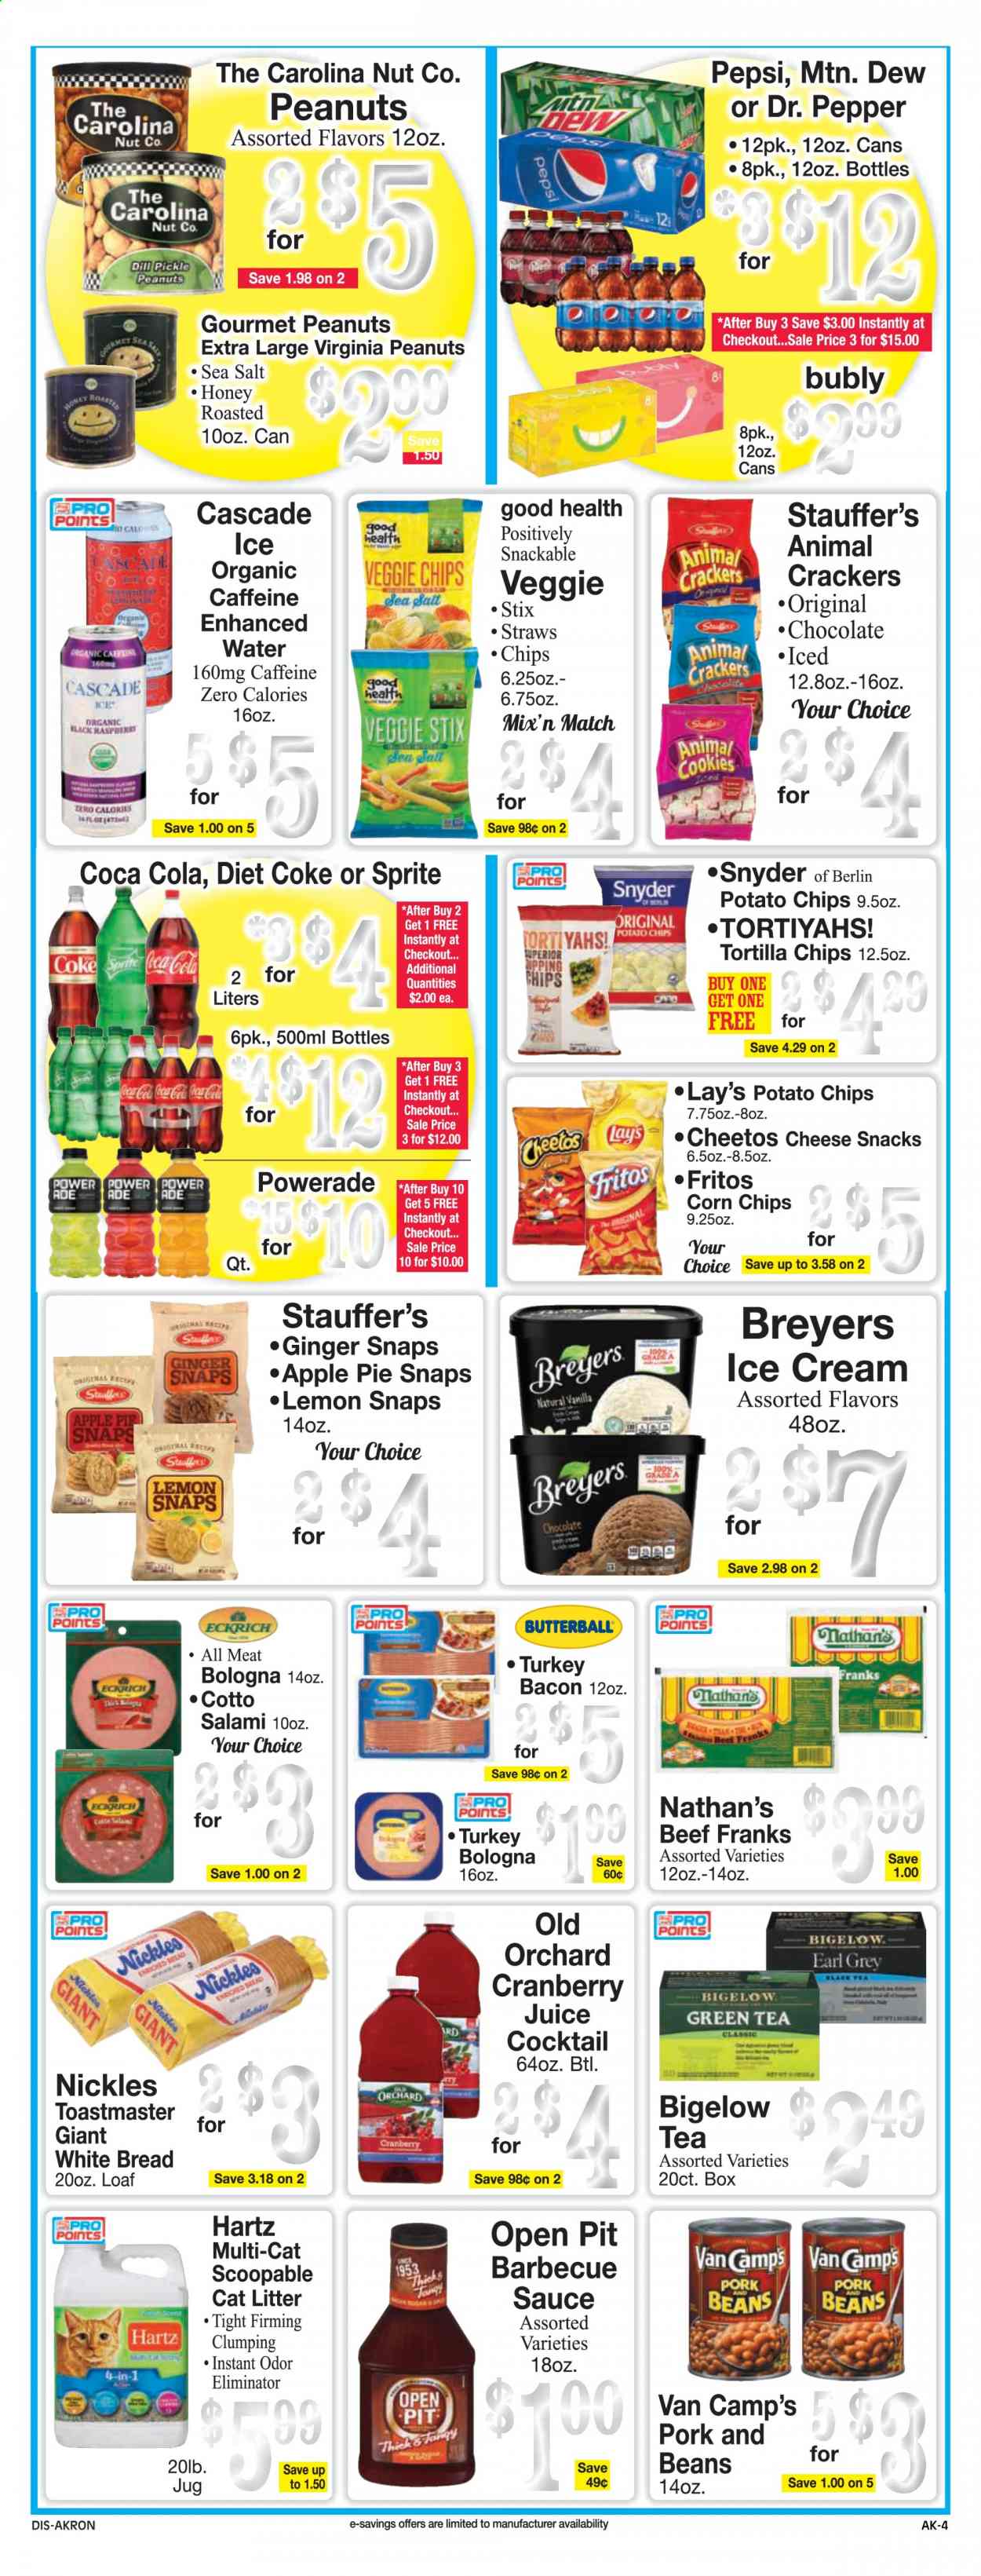 thumbnail - Discount Drug Mart Flyer - 03/03/2021 - 03/09/2021 - Sales products - bread, white bread, apple pie, pie, ginger, sauce, bacon, salami, turkey bacon, bologna sausage, cheese, ice cream, beans, cookies, chocolate, crackers, tortilla chips, potato chips, Cheetos, chips, snack, Lay’s, corn chips, sea salt, Fritos, dill, BBQ sauce, honey, peanuts, Coca-Cola, cranberry juice, Mountain Dew, Sprite, Powerade, Pepsi, juice, Dr. Pepper, Diet Coke, green tea, tea, Butterball, odor eliminator, Cascade, straw, cat litter, Apple. Page 4.